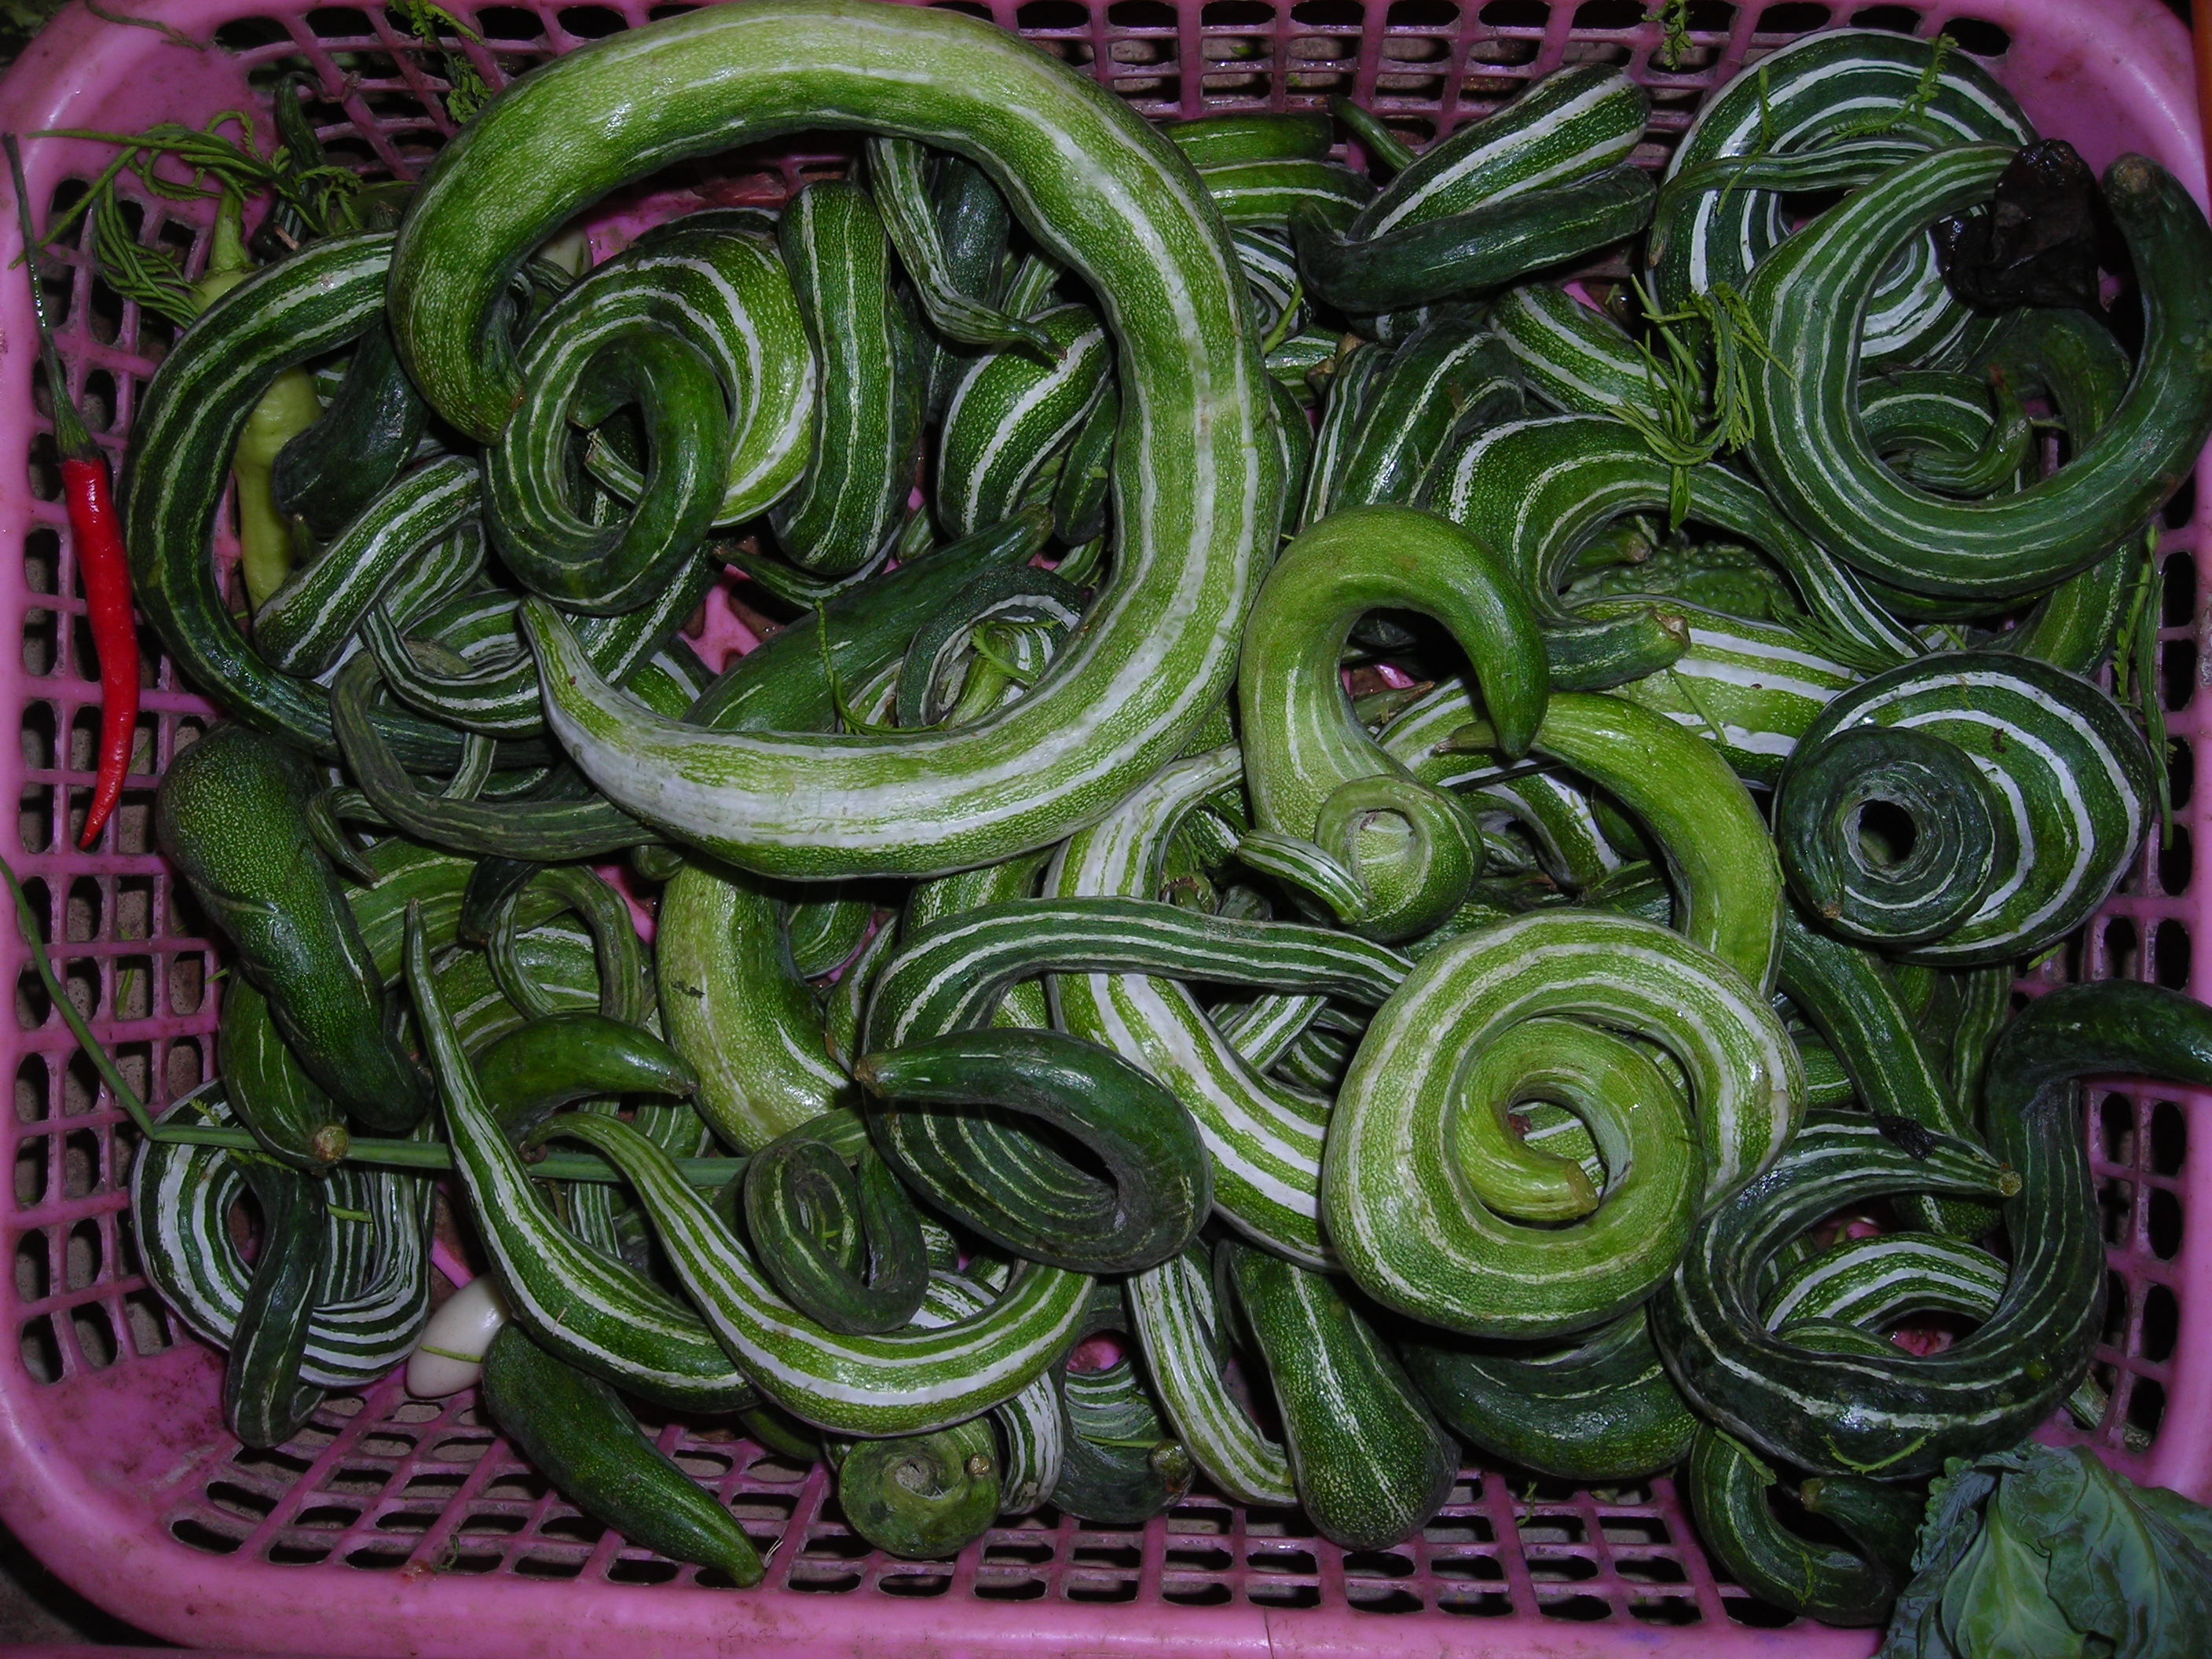 Curly cucumbers - Thailand